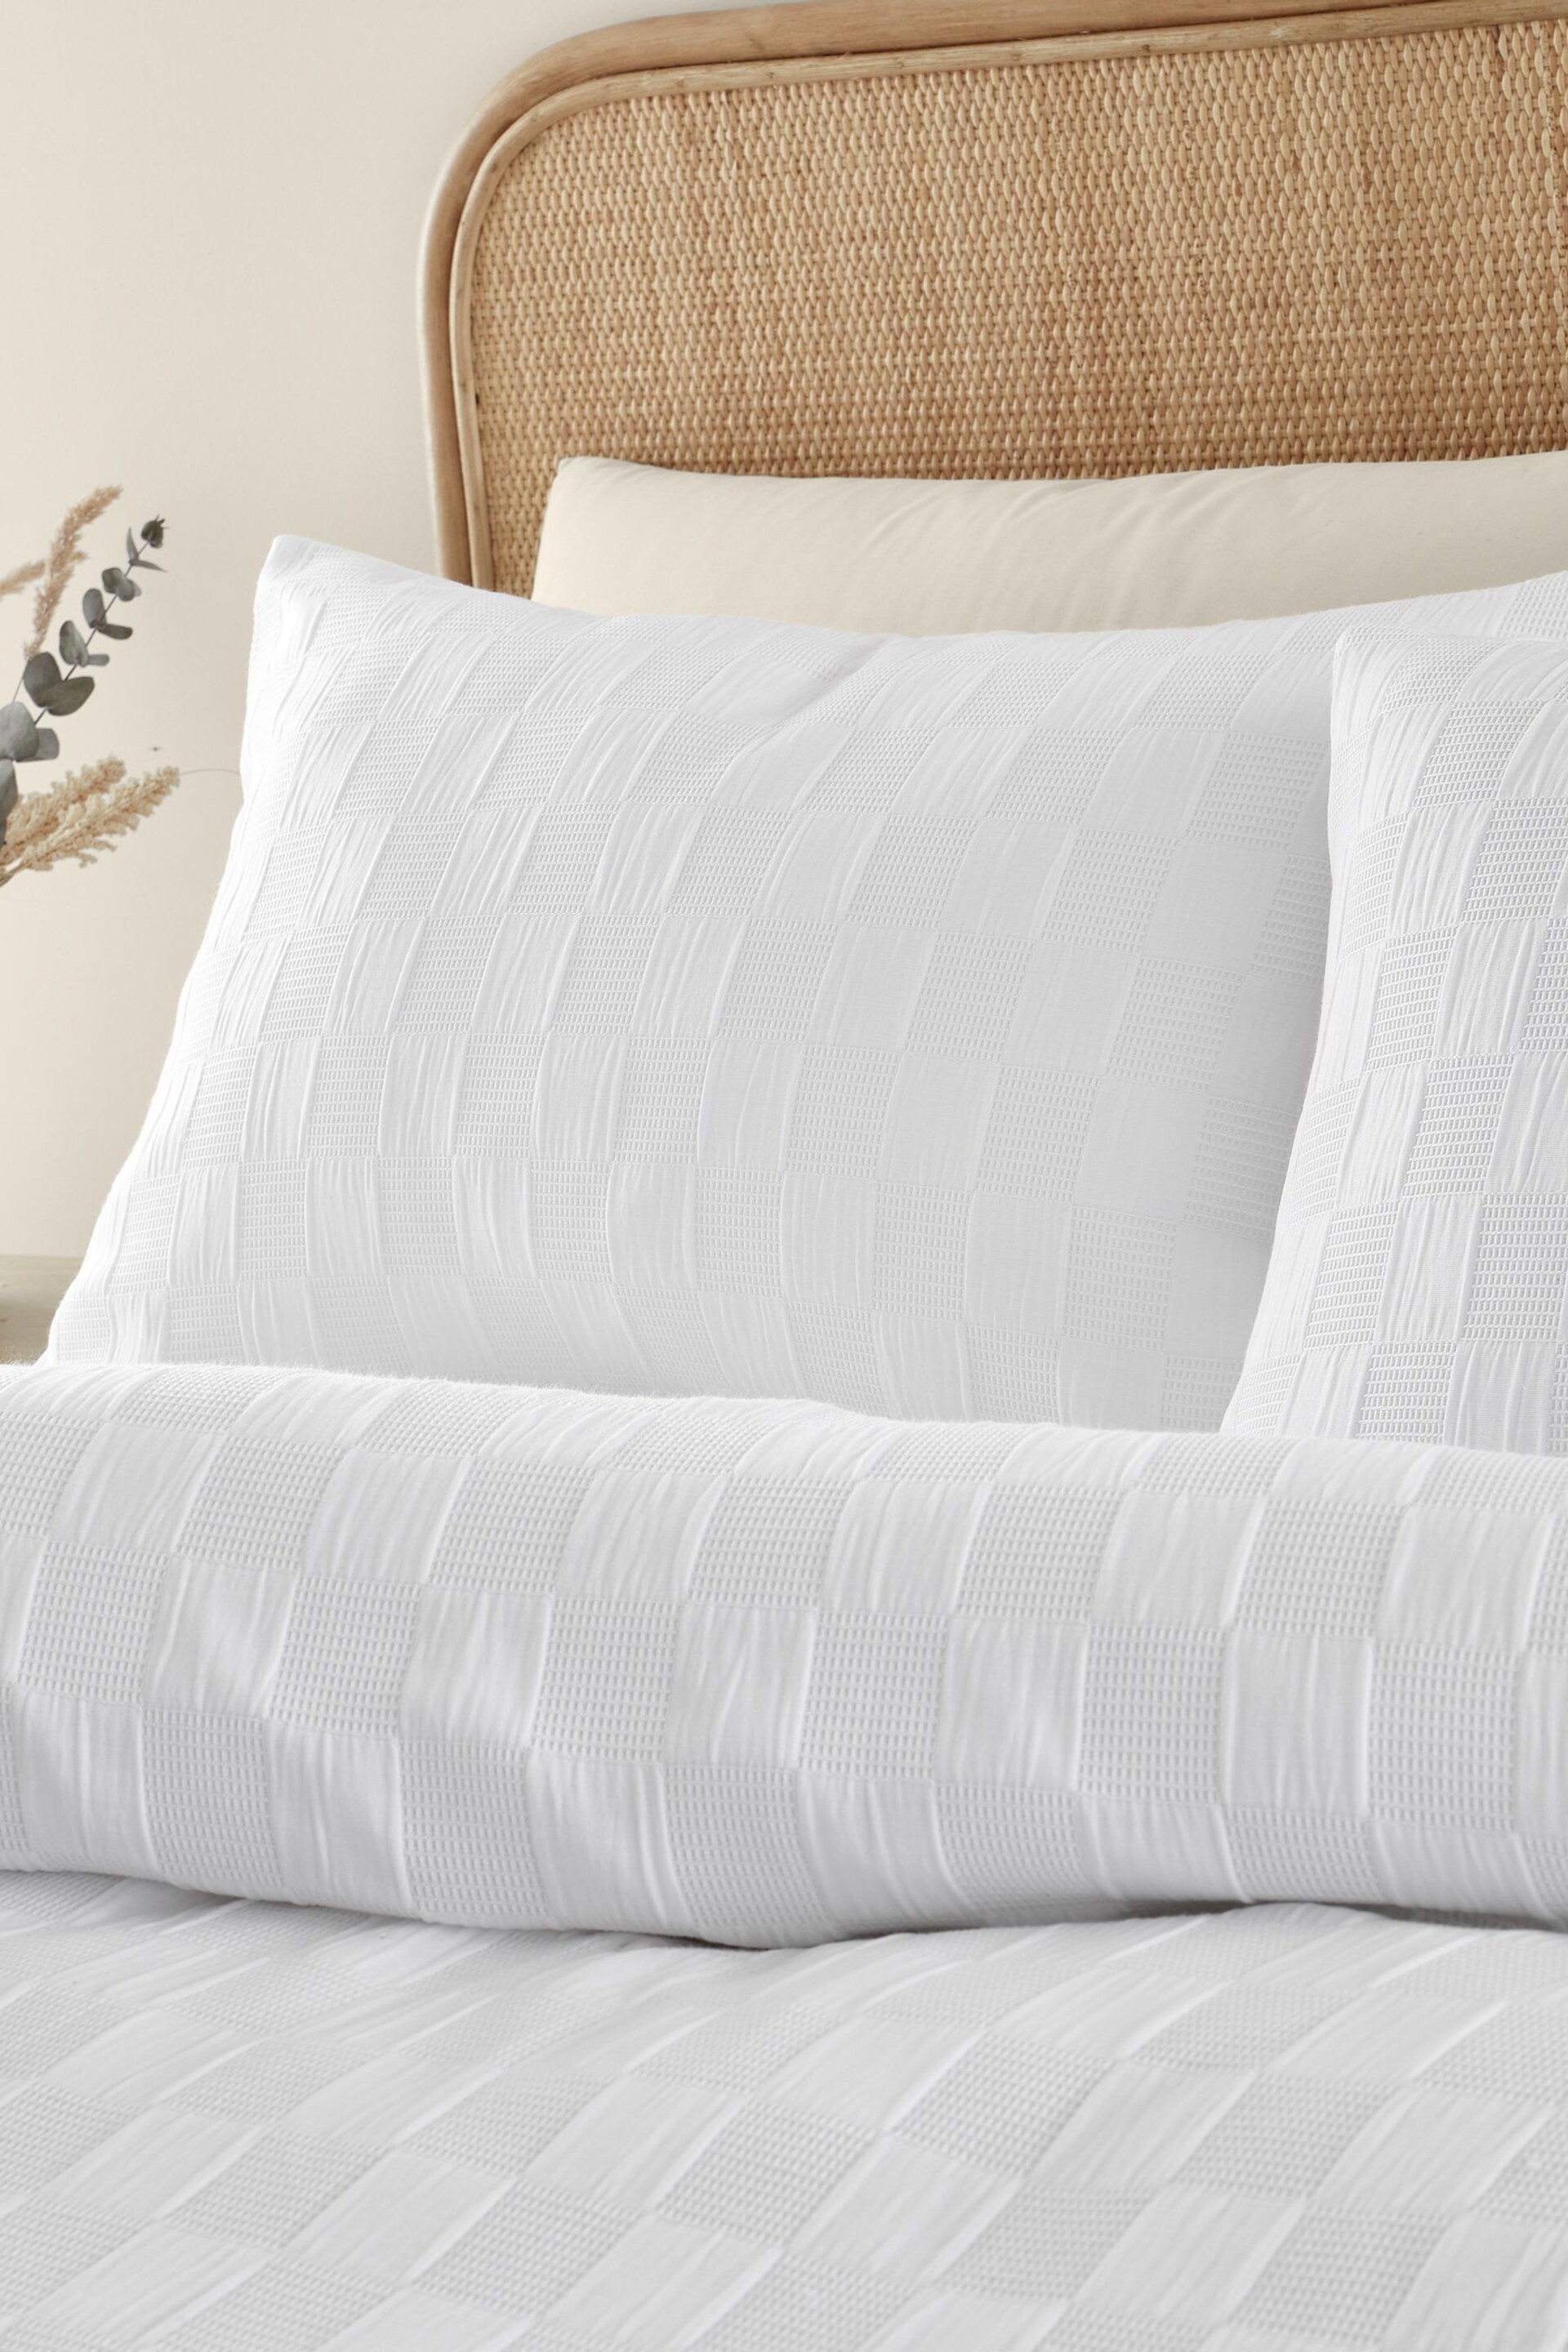 Catherine Lansfield White Waffle Checkerboard Duvet Cover Set - Image 3 of 5